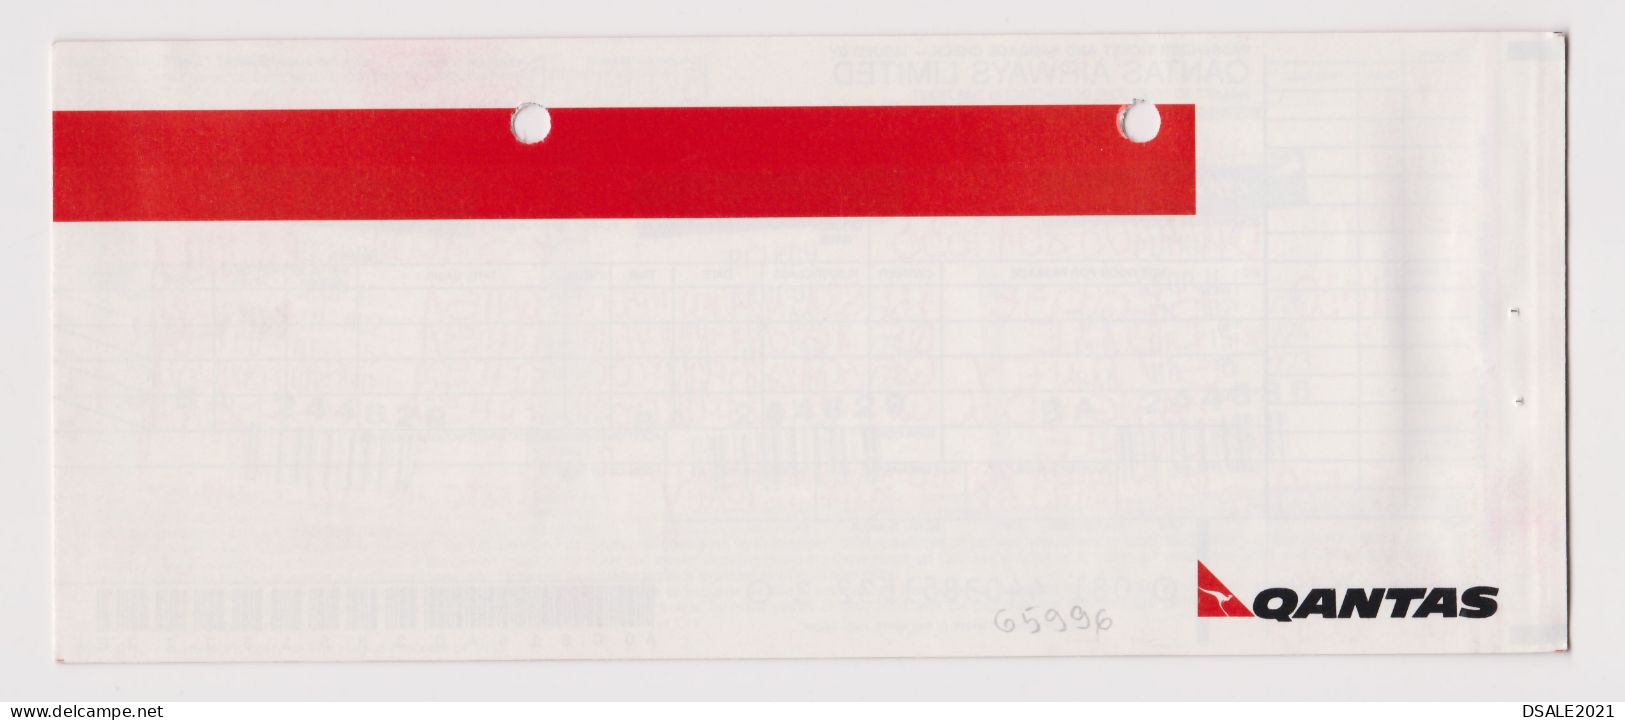 QANTAS, Australia Australian Airline Carrier Passenger Ticket And Baggage Check Used (65996) - Tickets